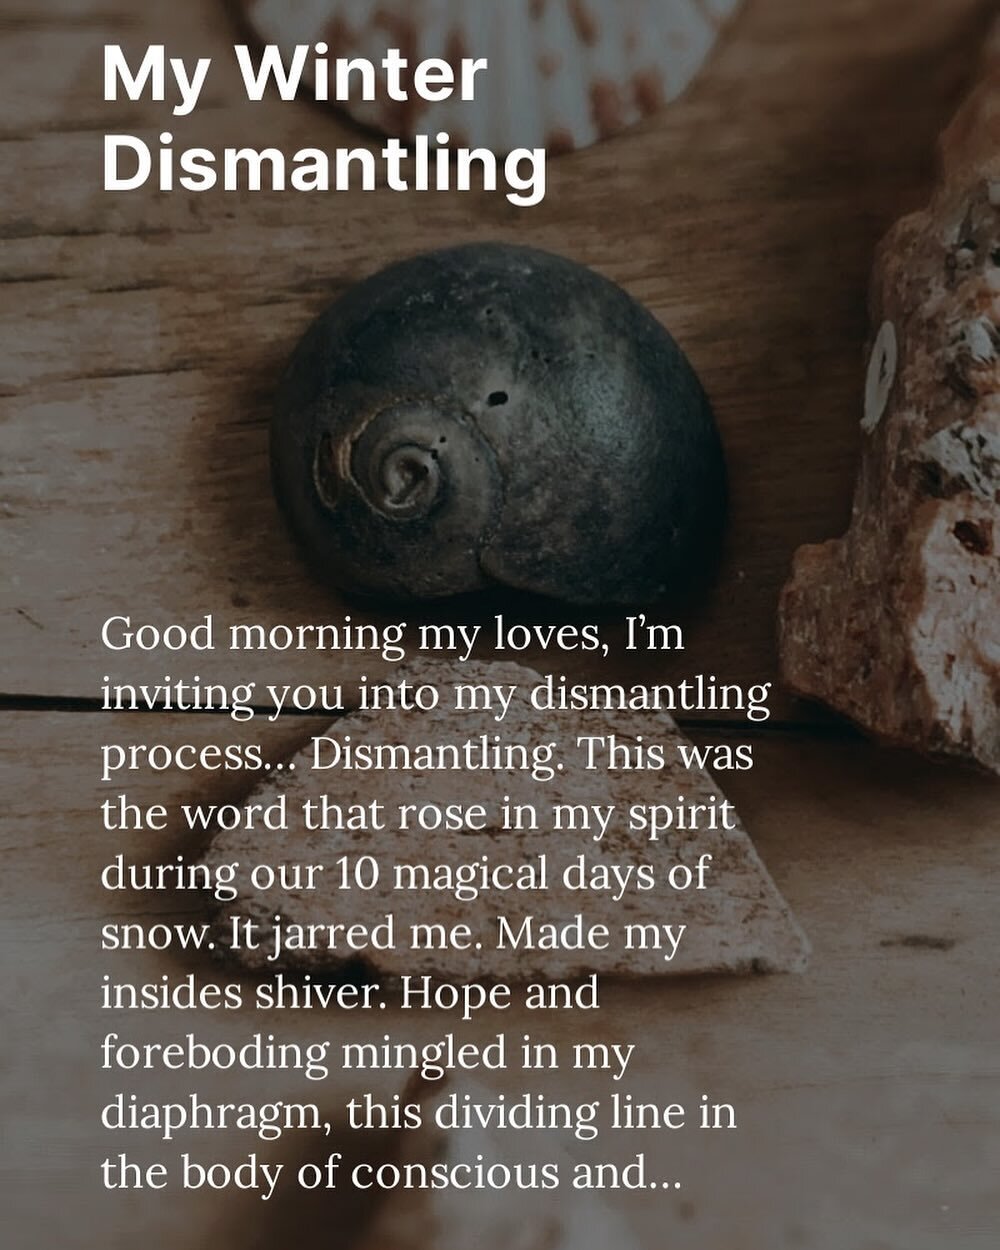 I&rsquo;m inviting you into my dismantling process&hellip;. You can read it all on my Substack..

Dismantling. This was the word that rose in my spirit during our 10 magical days of snow. It jarred me. Made my insides shiver. Hope and foreboding ming